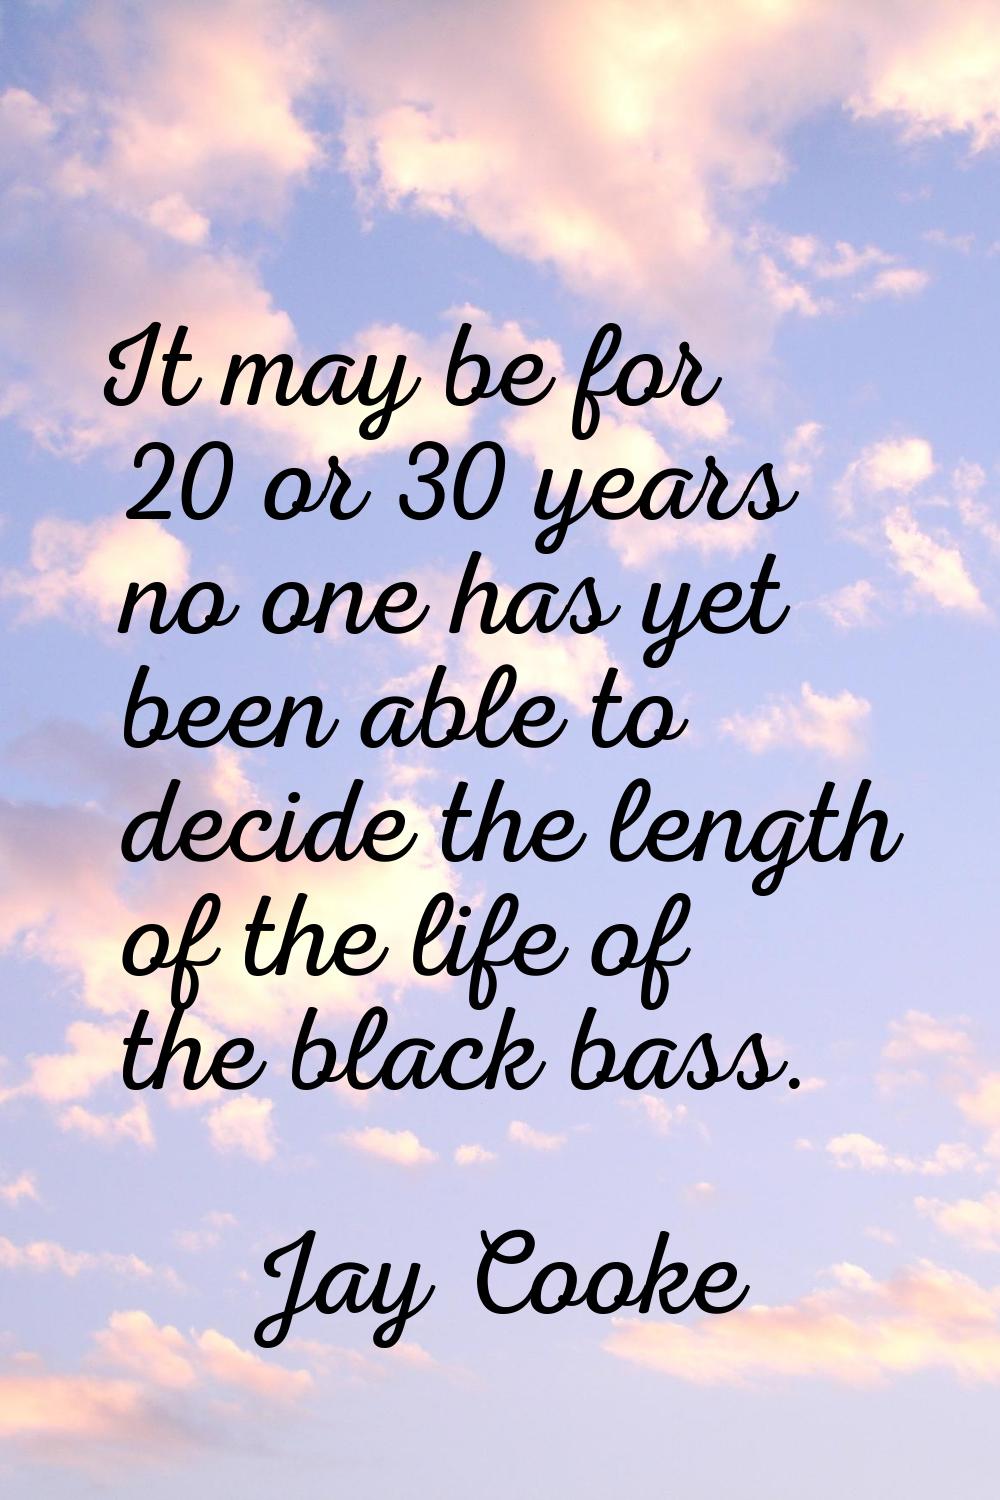 It may be for 20 or 30 years no one has yet been able to decide the length of the life of the black